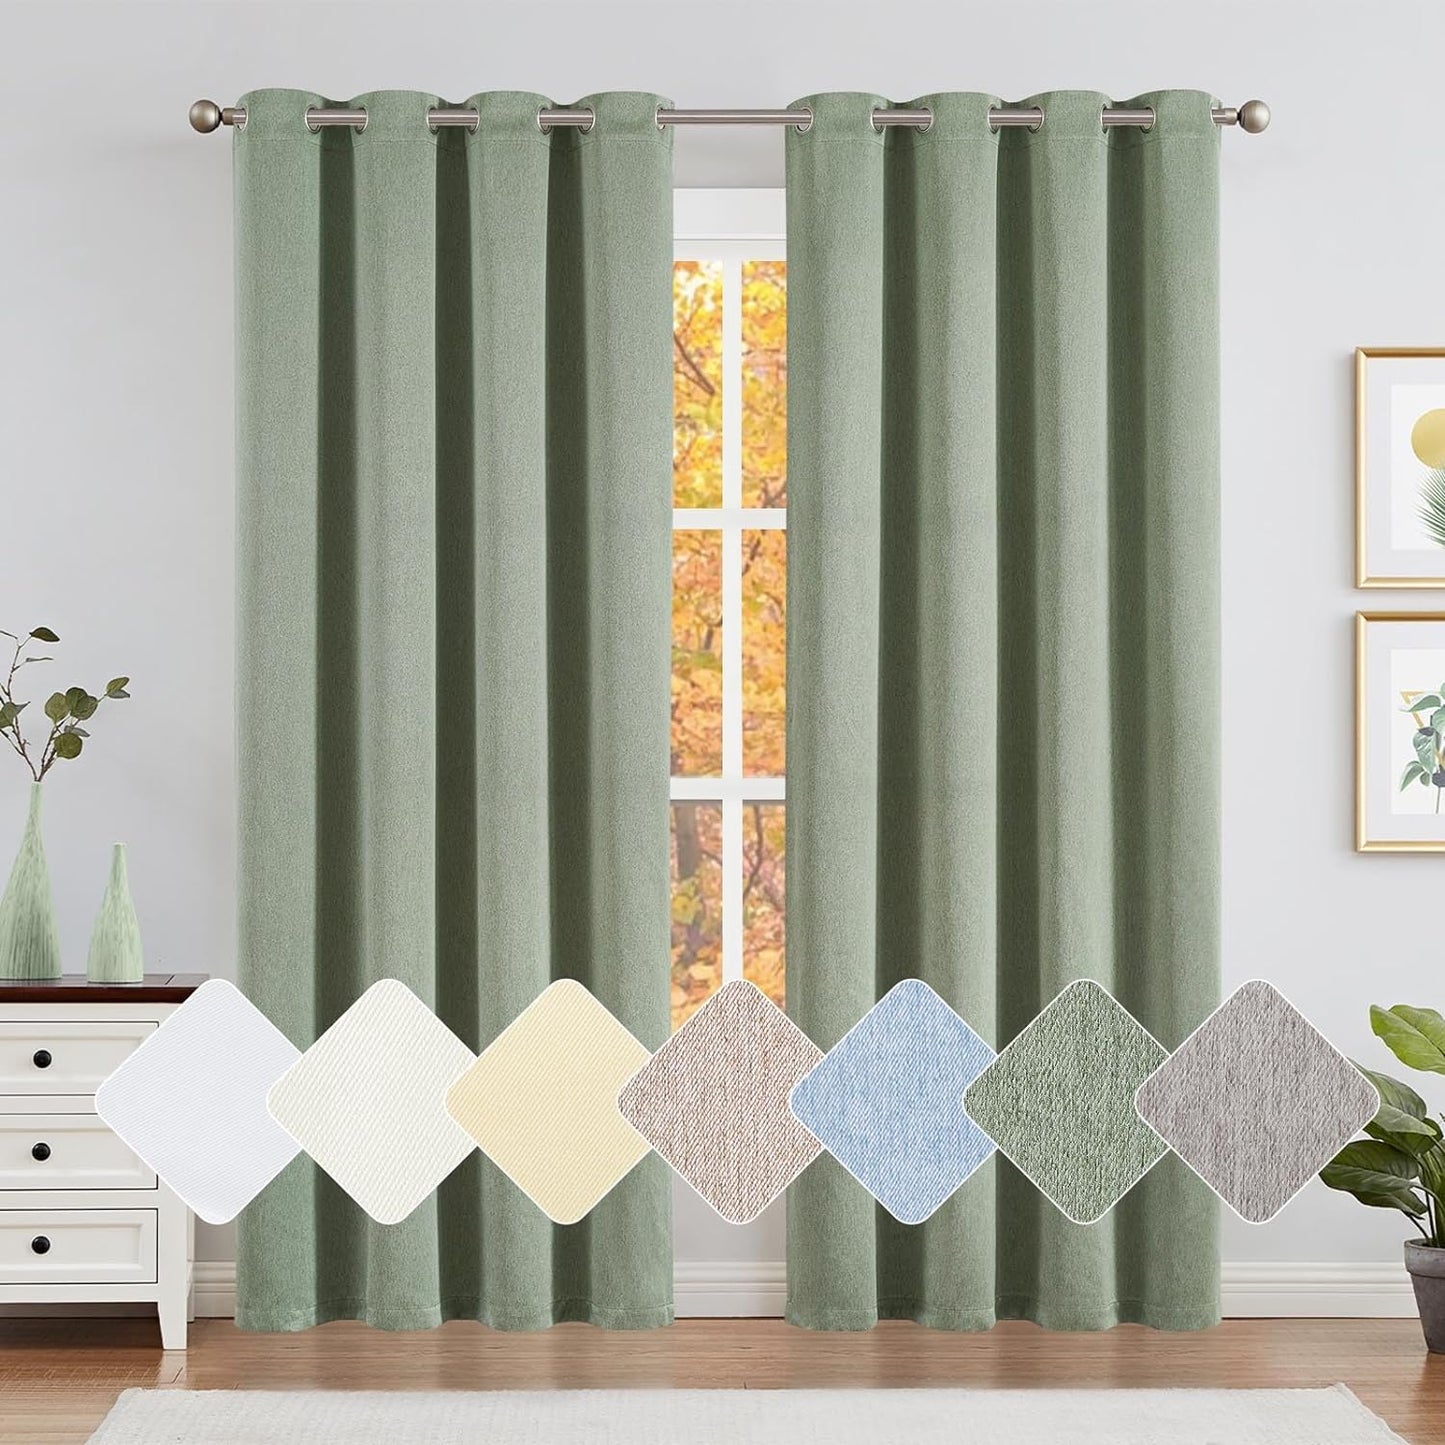 Jinchan Curtains for Bedroom Living Room 84 Inch Long Room Darkening Farmhouse Country Window Curtains Heathered Denim Blue Curtains Grommet Curtains Drapes 2 Panels  CKNY HOME FASHION *Sage Green 50"W X 84"L 